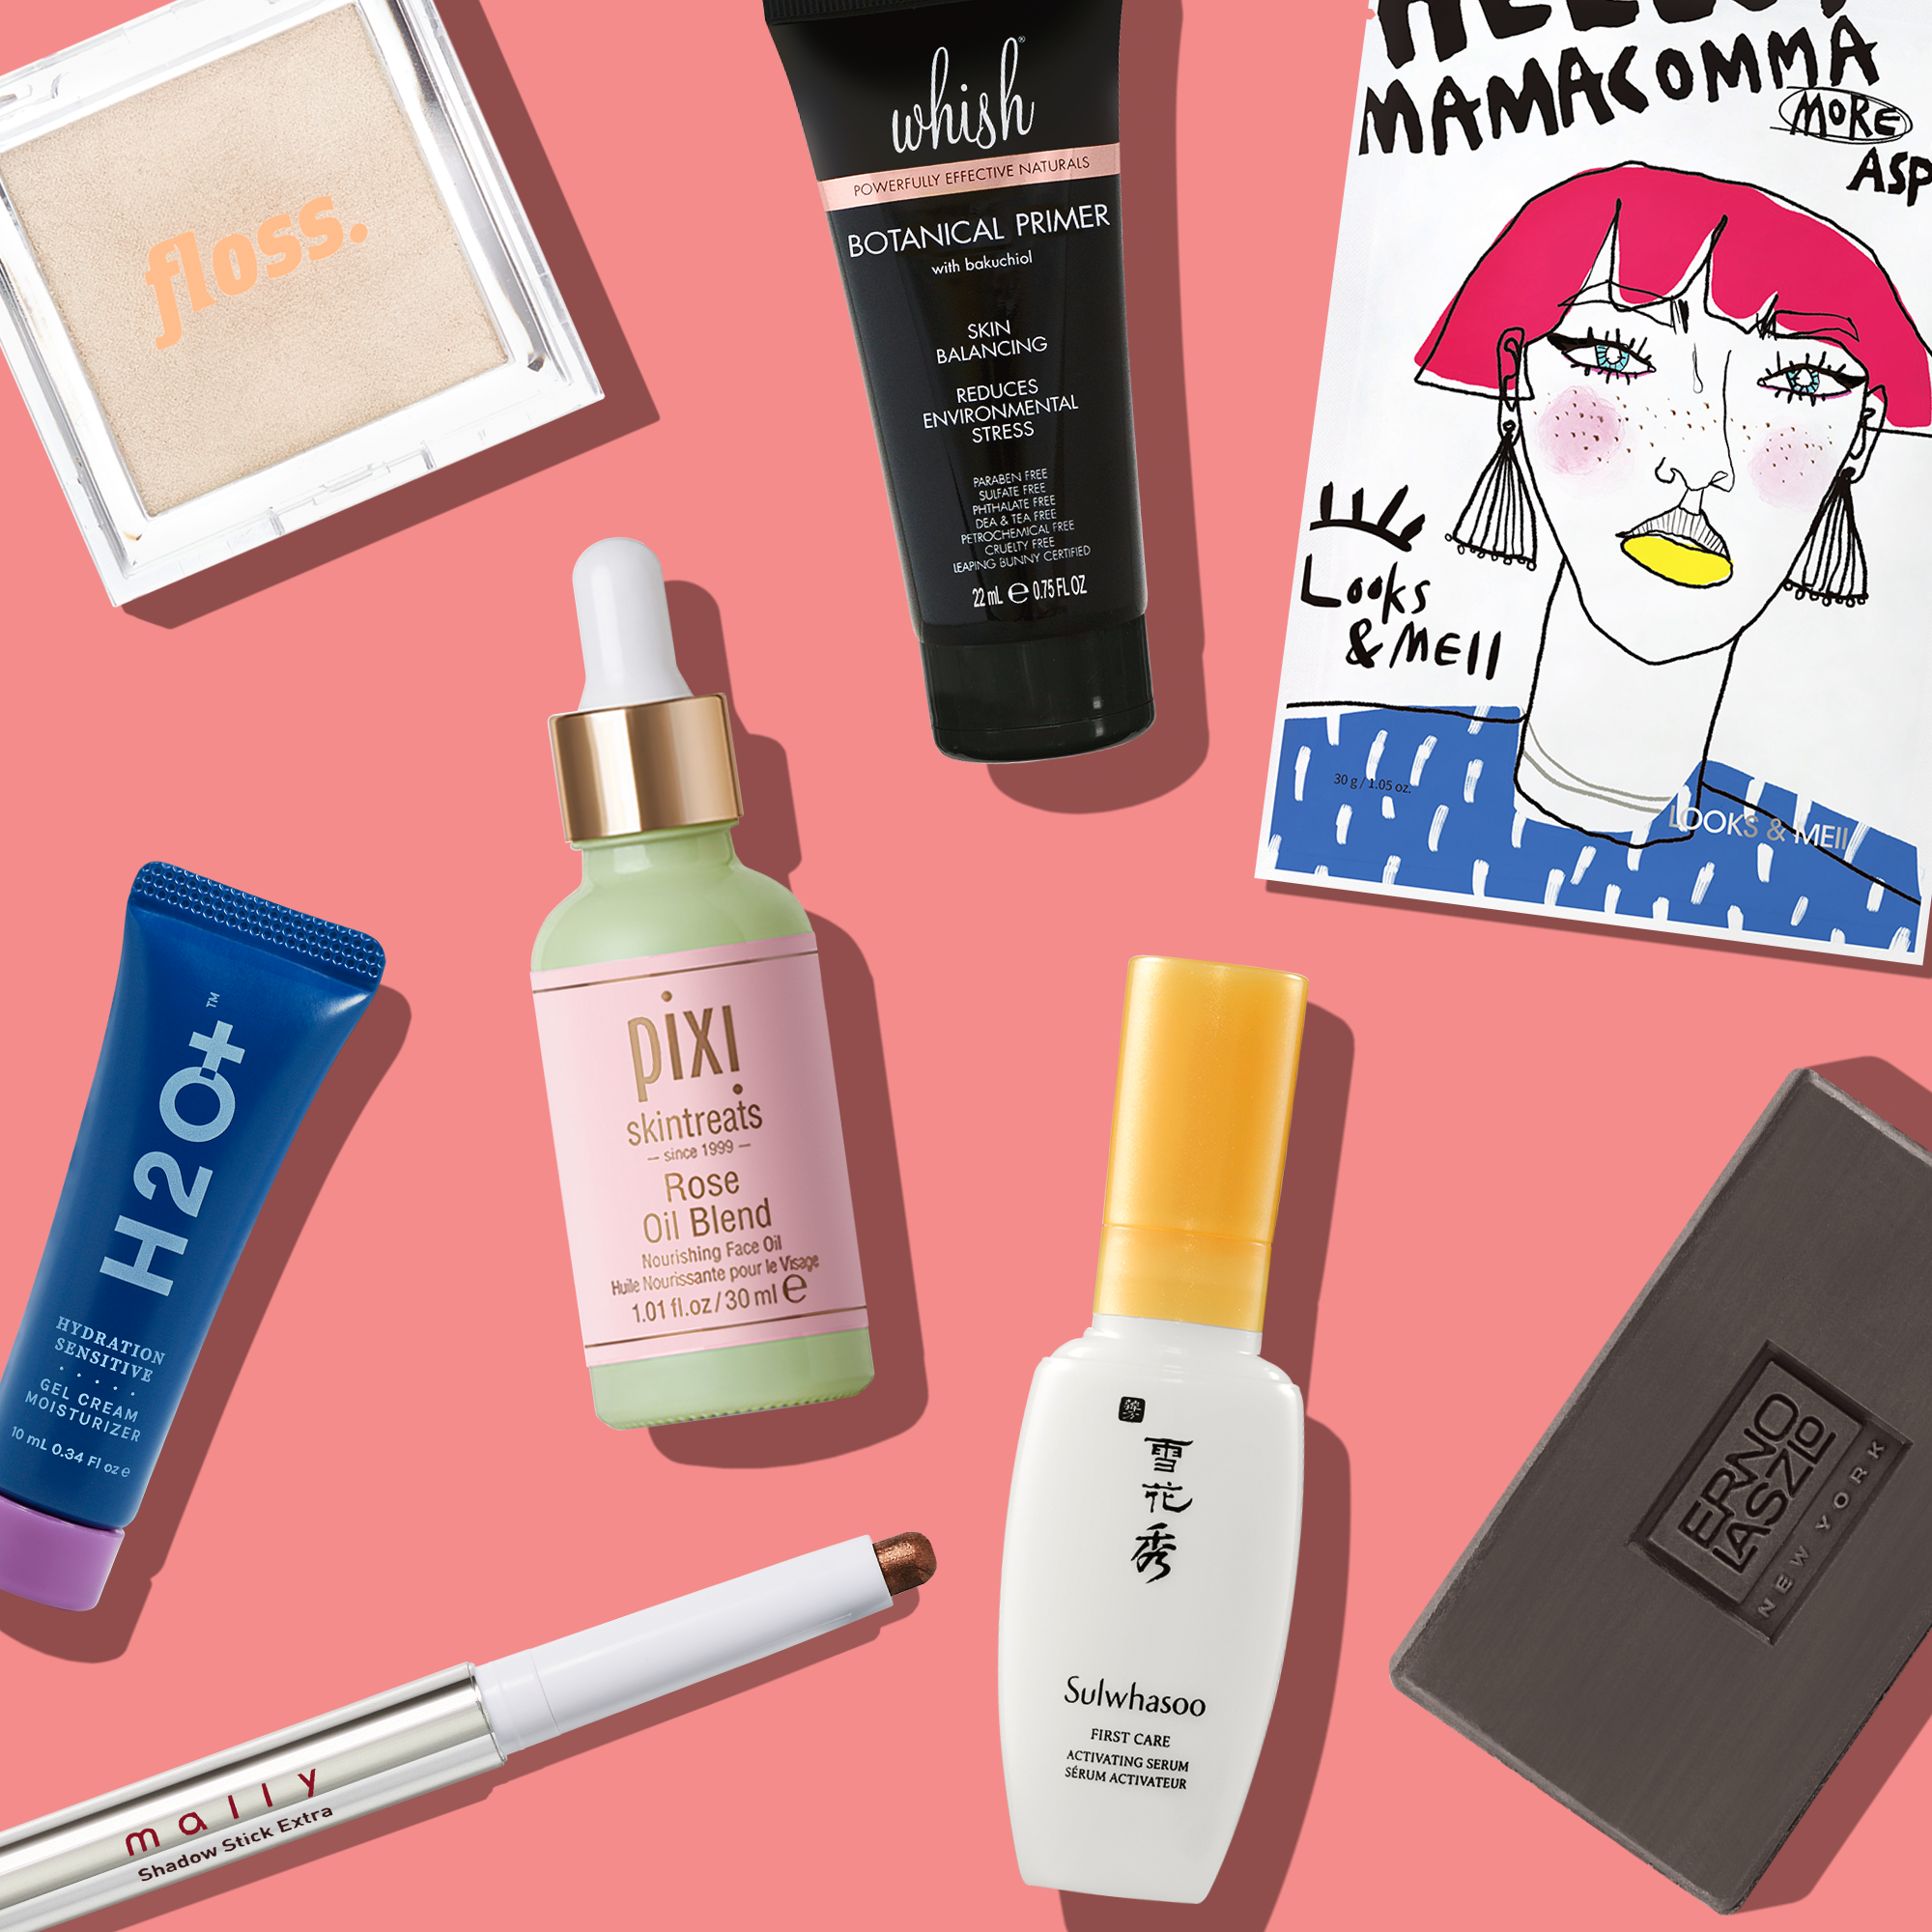 The August 2020 Allure Beauty Box: See All the Product Samples You Could Get This Month